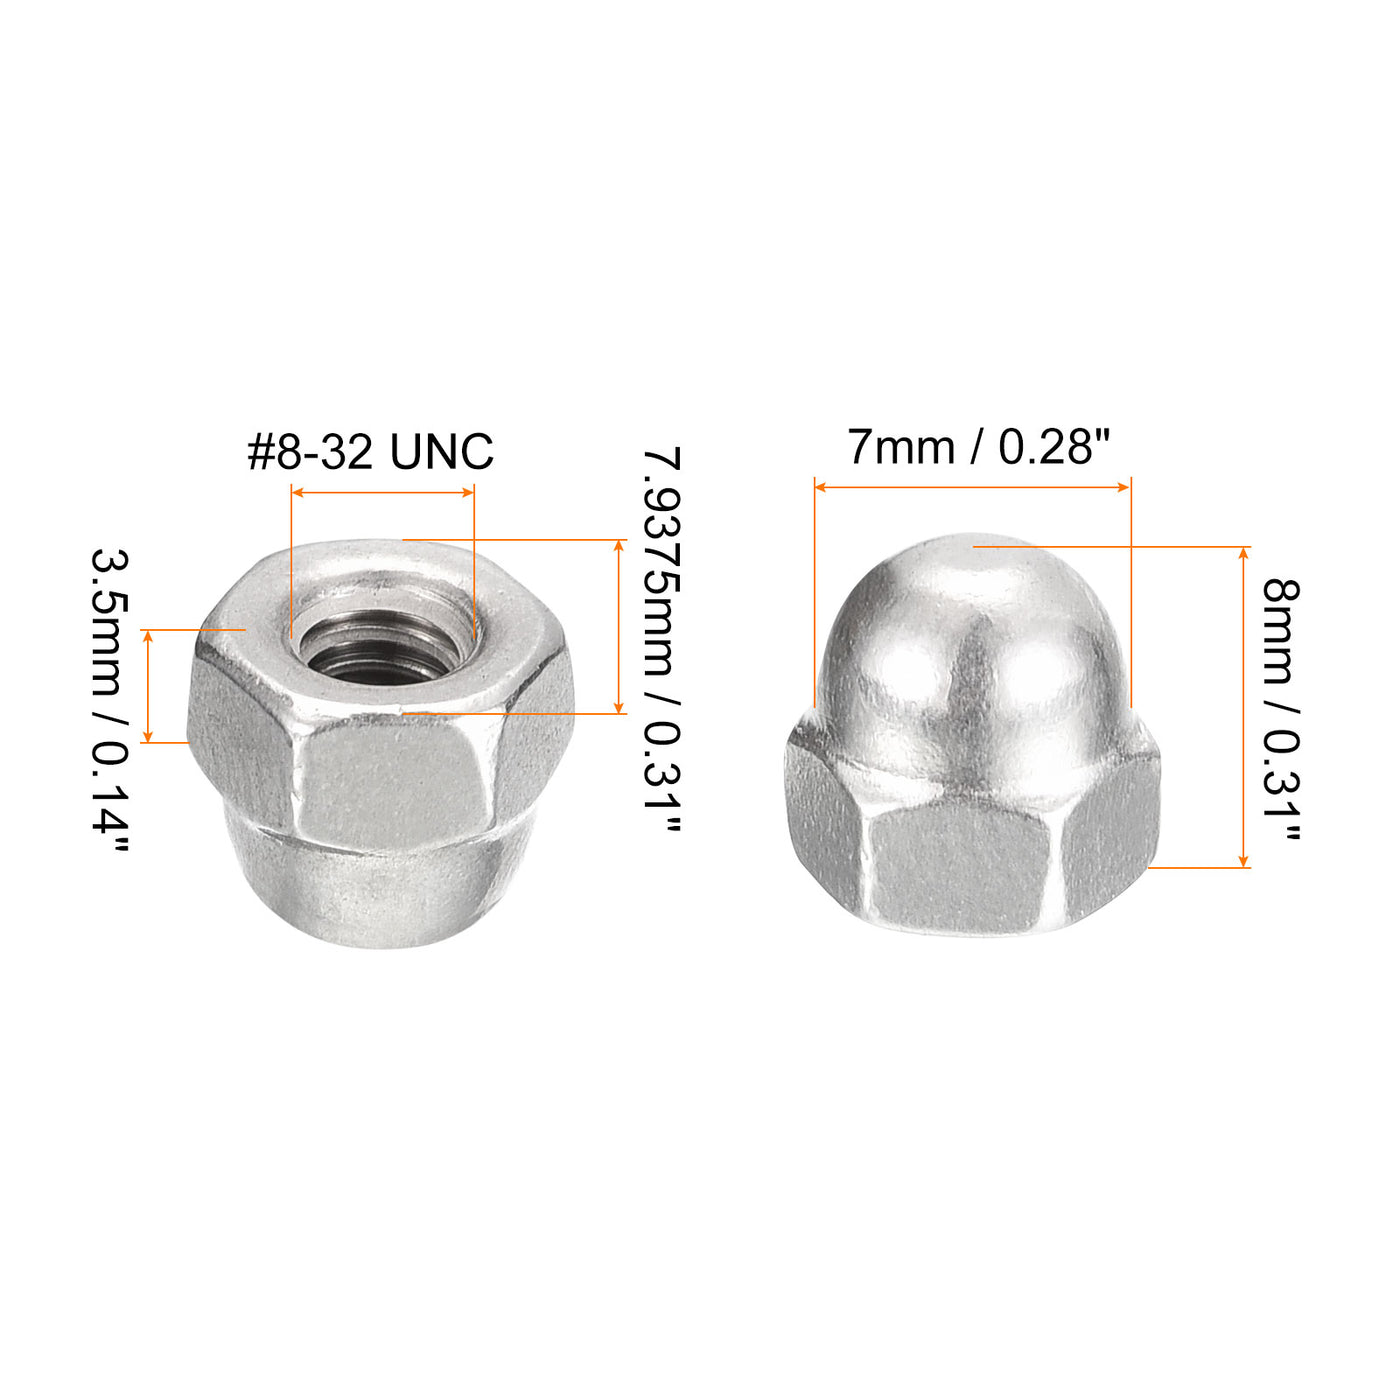 uxcell Uxcell #8-32 Acorn Cap Nuts,50pcs - 304 Stainless Steel Hardware Nuts, Acorn Hex Cap Dome Head Nuts for Fasteners (Silver)